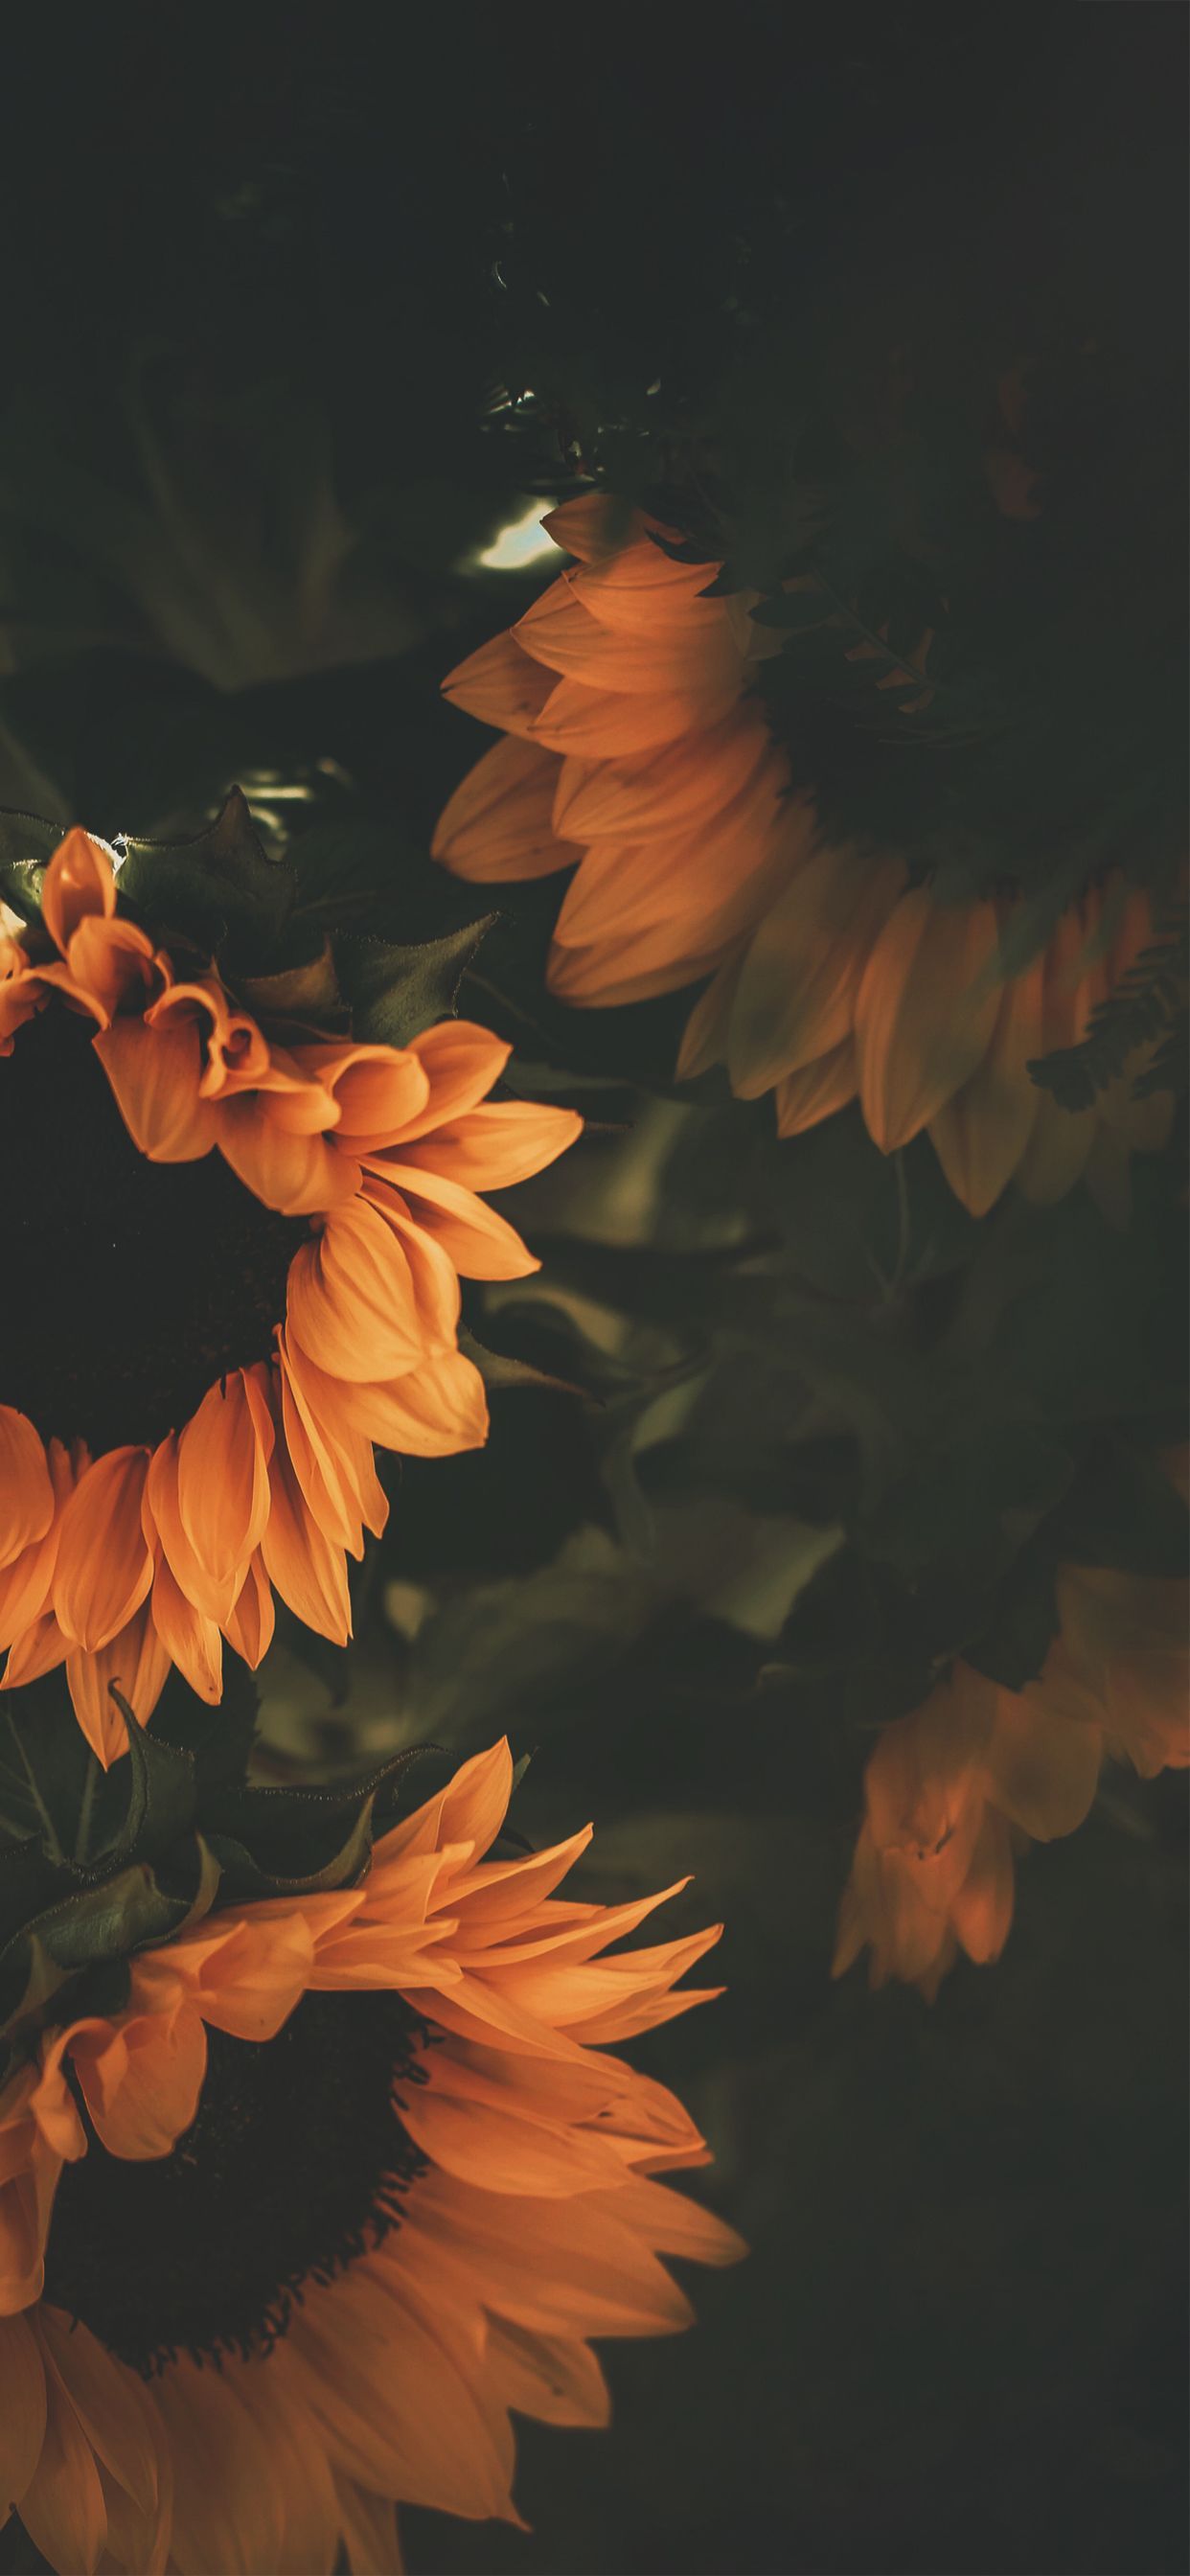 Your Weekly Wednesday Wallpaper. Sunflower iphone wallpaper, Background phone wallpaper, Sunflower wallpaper